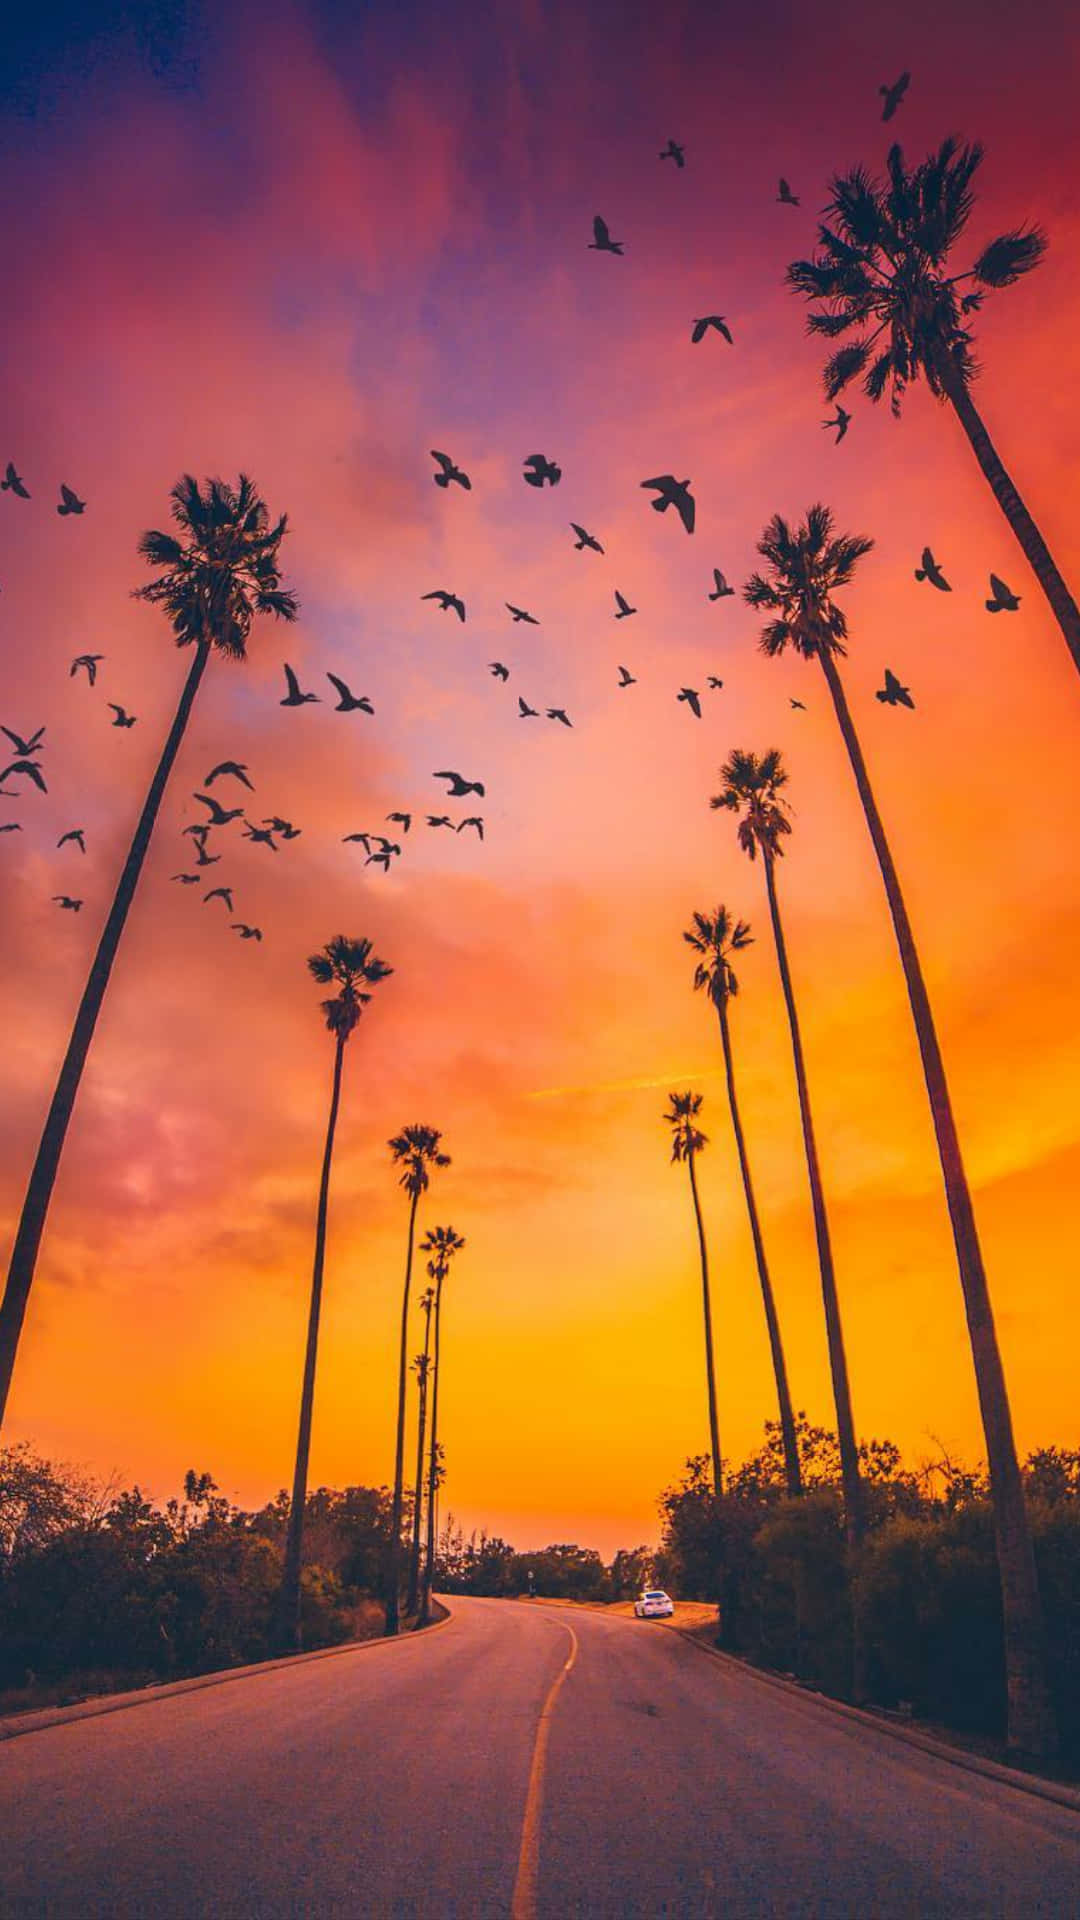 Sunset With Palm Tree Road Wallpaper